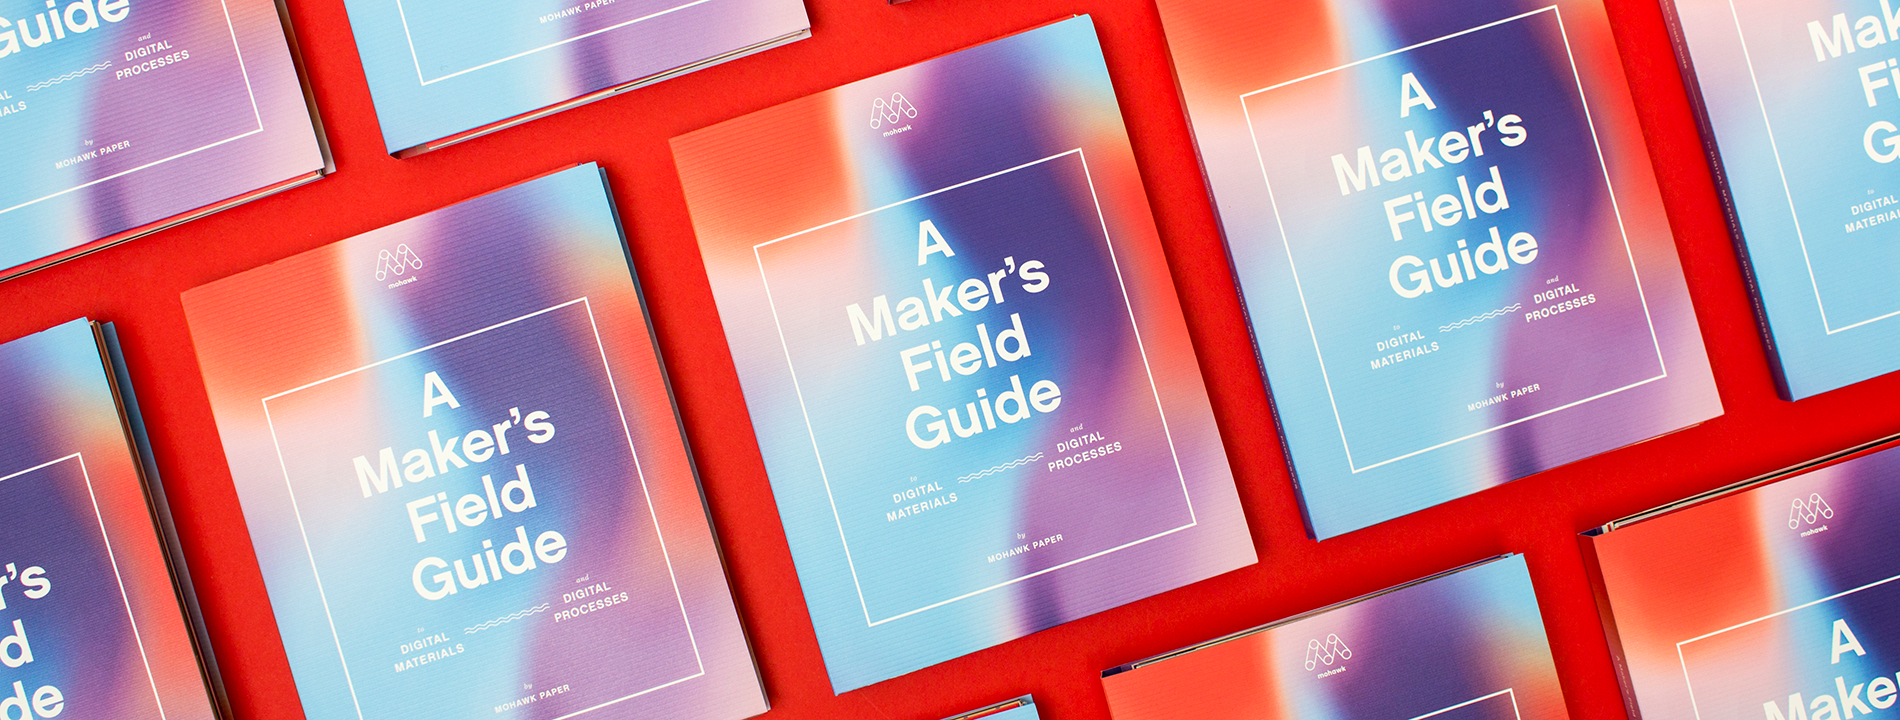 Makers Field Guides arranged in a grid and photographed from above